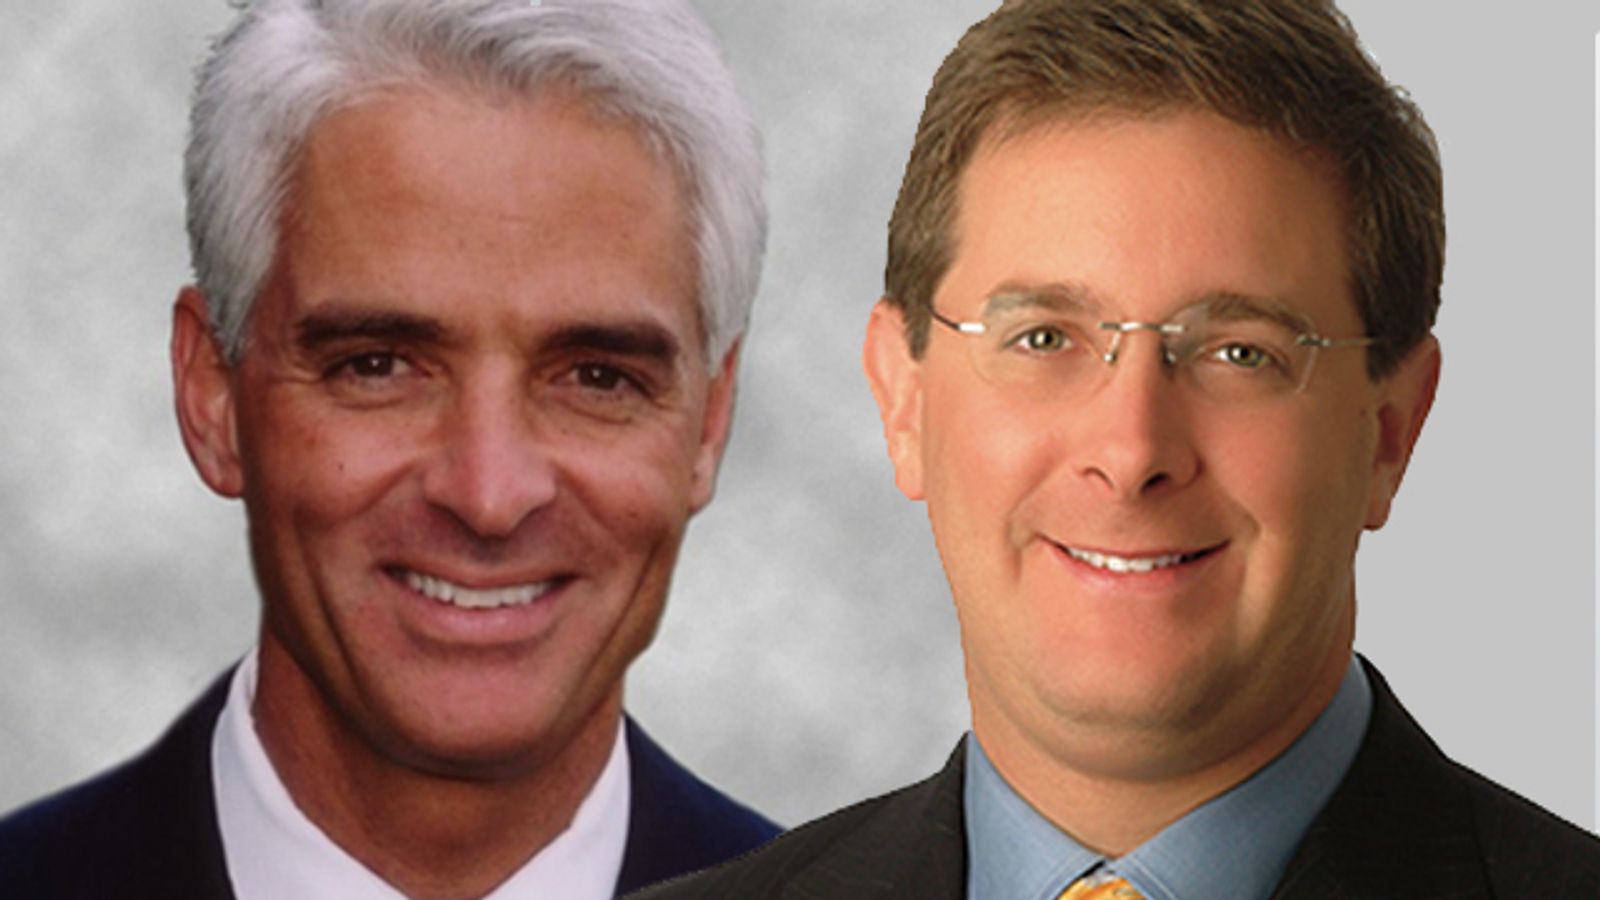 FriendFinder’s Marc Bell to Throw Charlie Crist Fundraiser